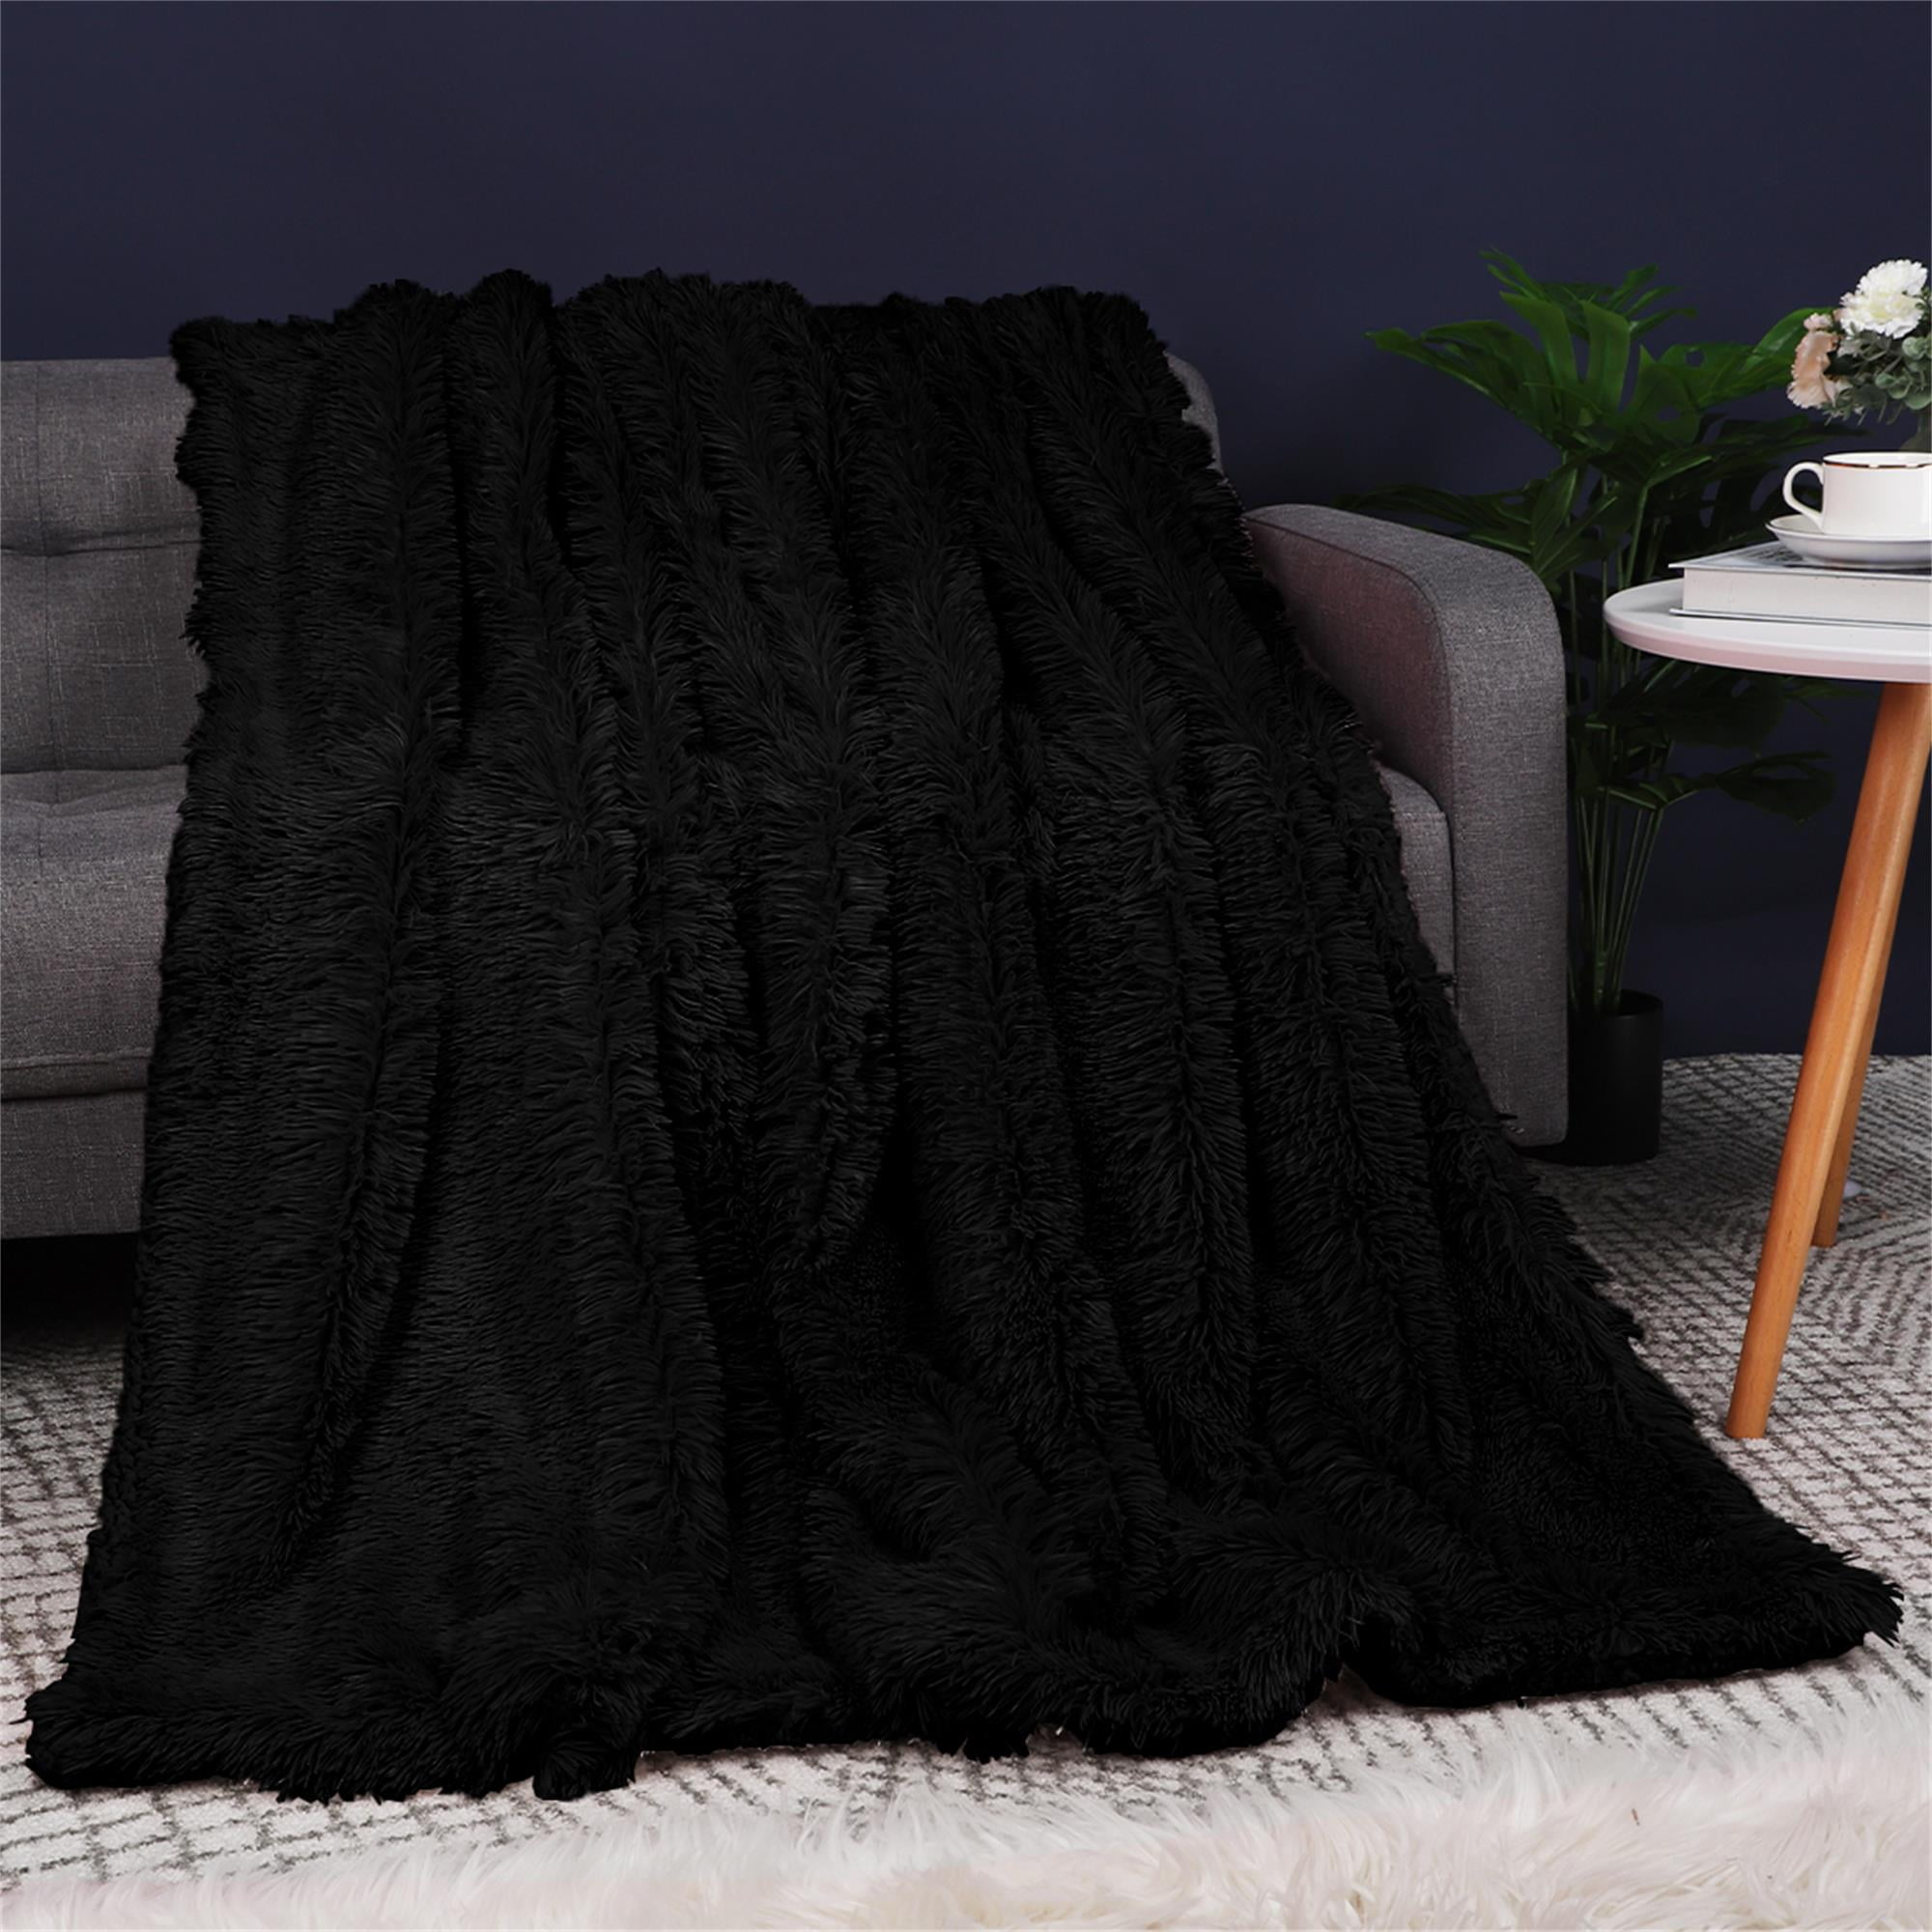 Meet 1998 Soft Sherpa Throw Blanket Puzzle Pattern Reversible Cozy Plush Fleece Blanket Black White Luxury Fluffy Bed Blanket for Couch Sofa Office 50x80 inch